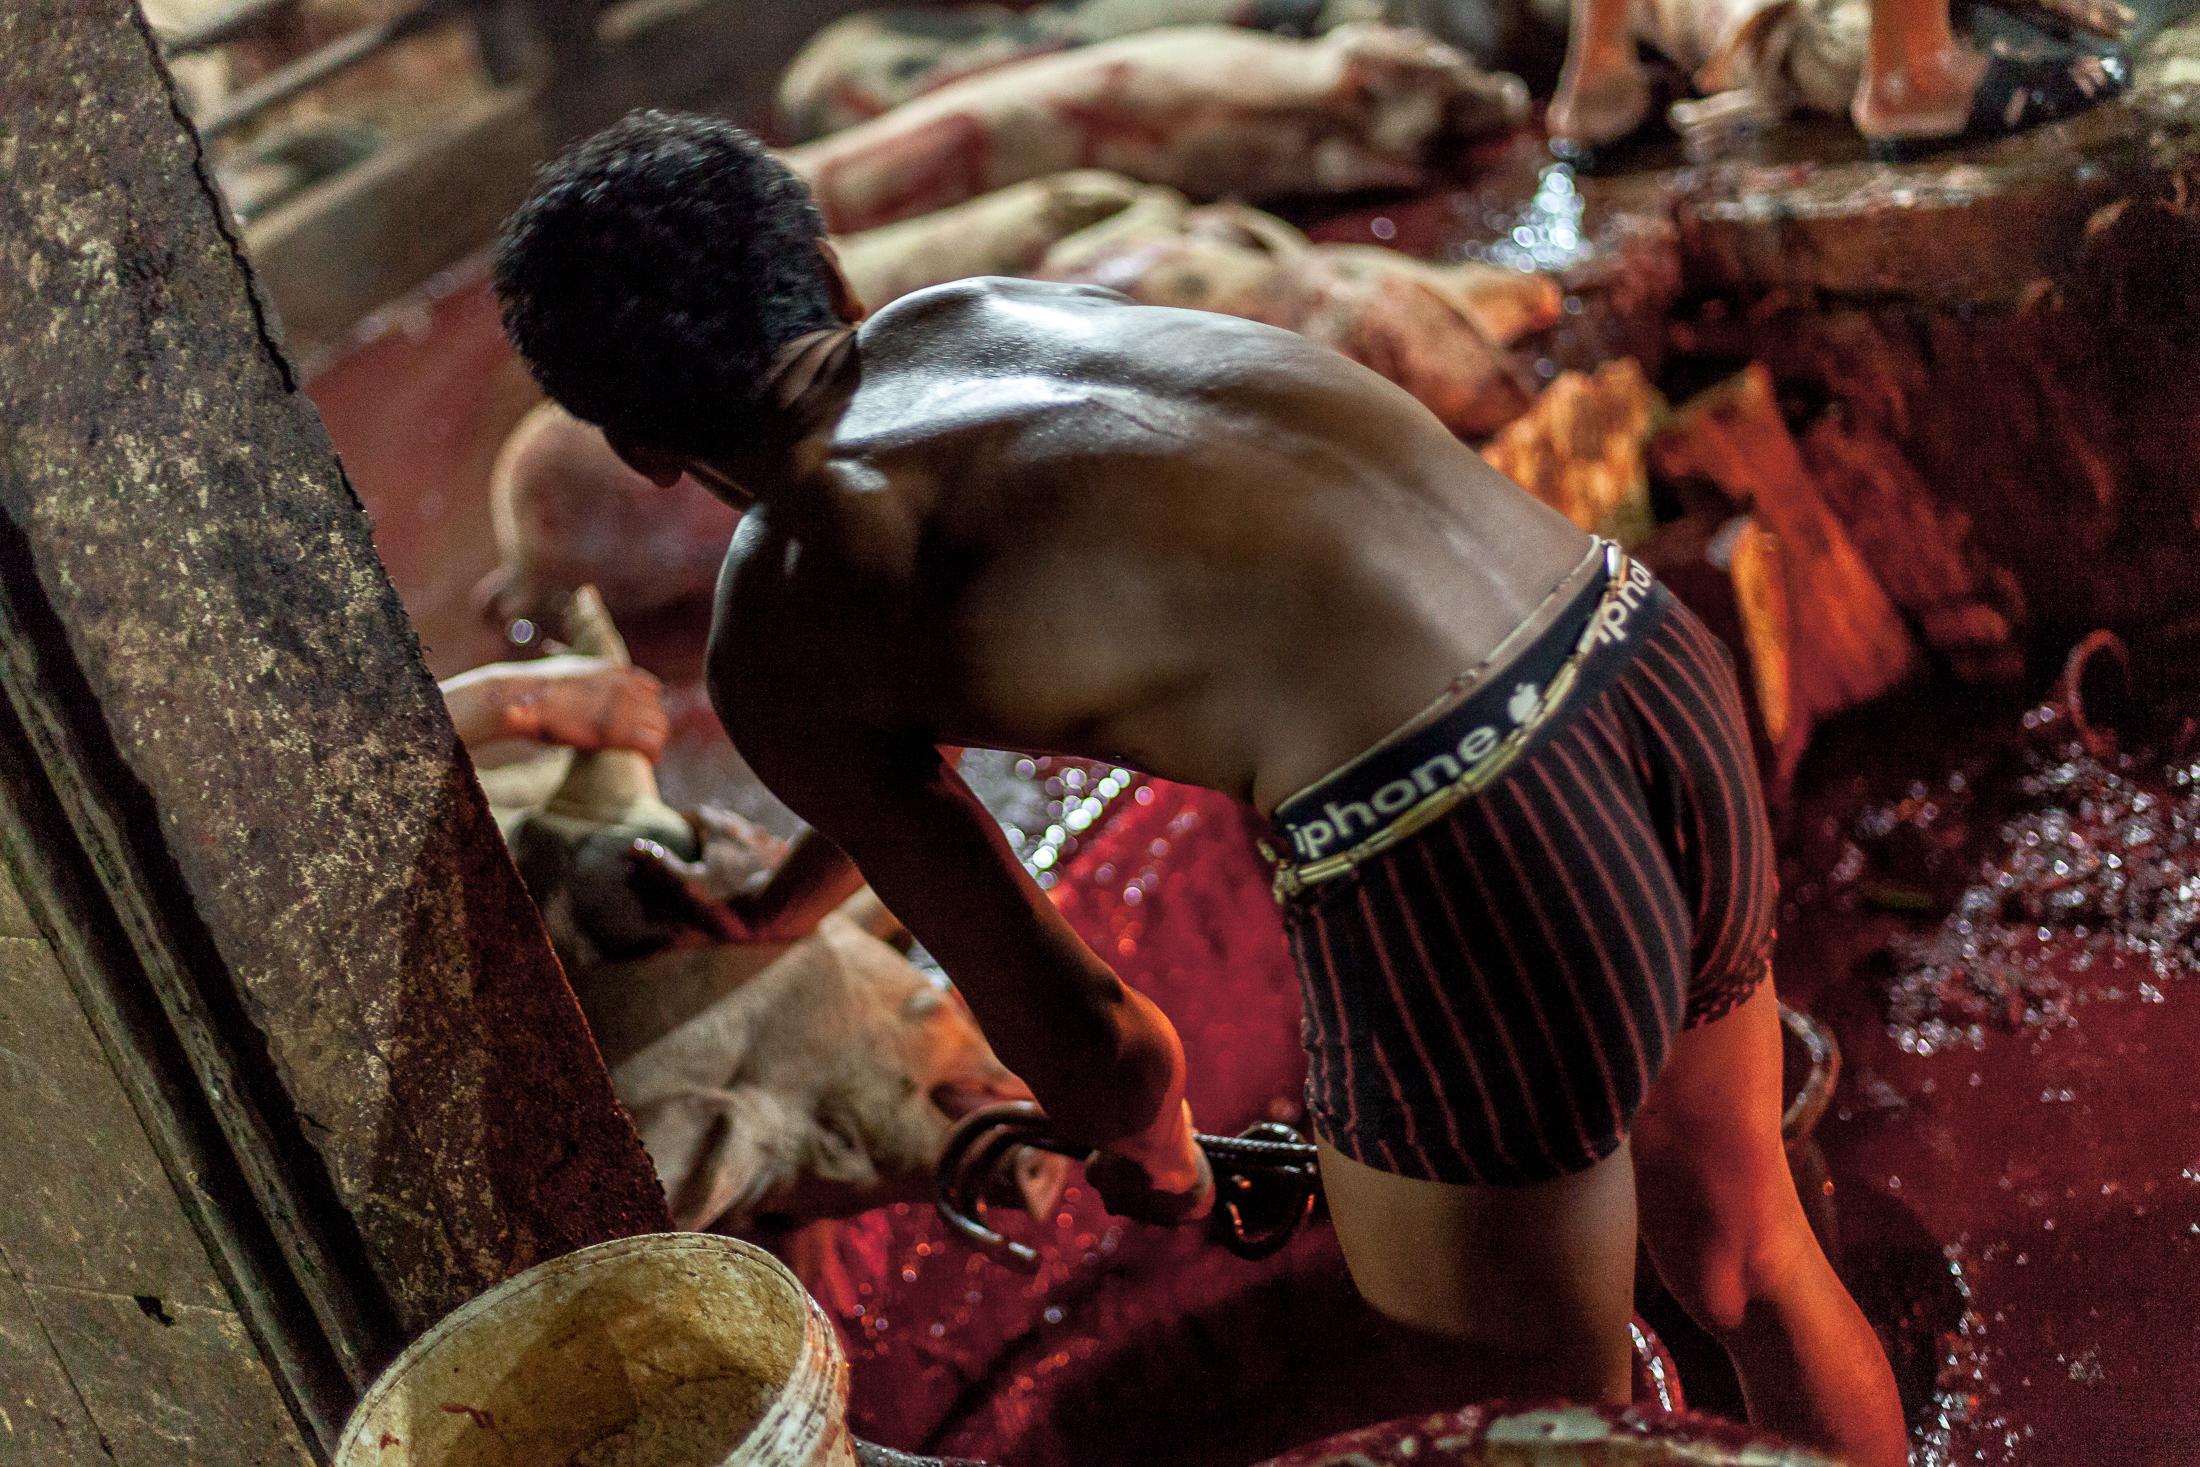 Inside a Cambodian Slaughterhouse - SIEM REAP, CAMBODIA - FEBRUARY 22: A young worker wearing...